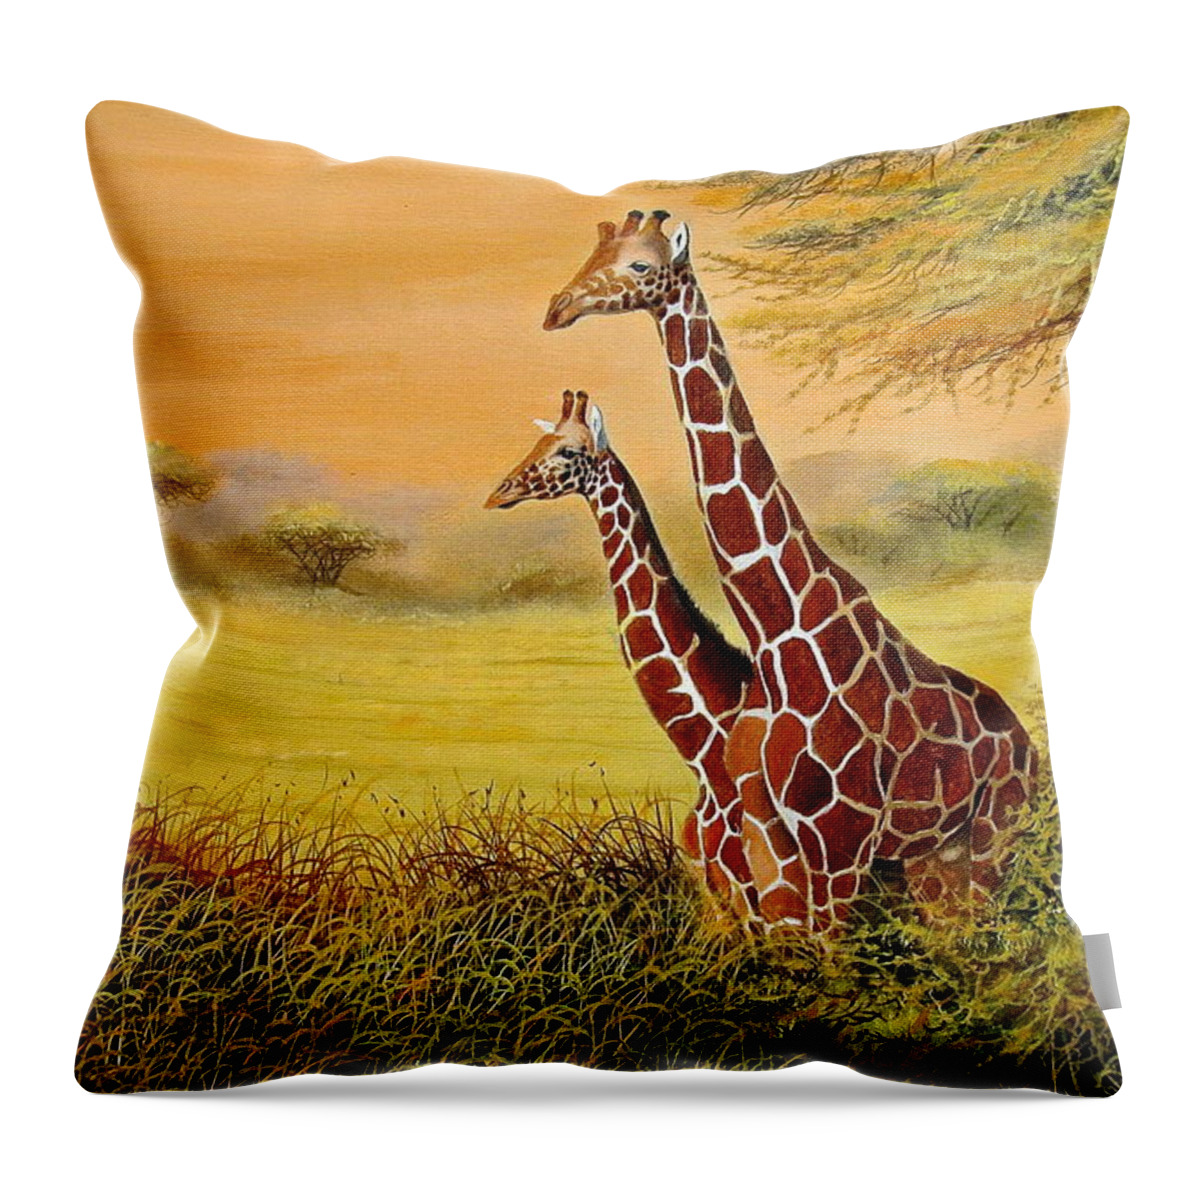 African Paintings Throw Pillow featuring the painting Giraffes Watching by Wycliffe Ndwiga